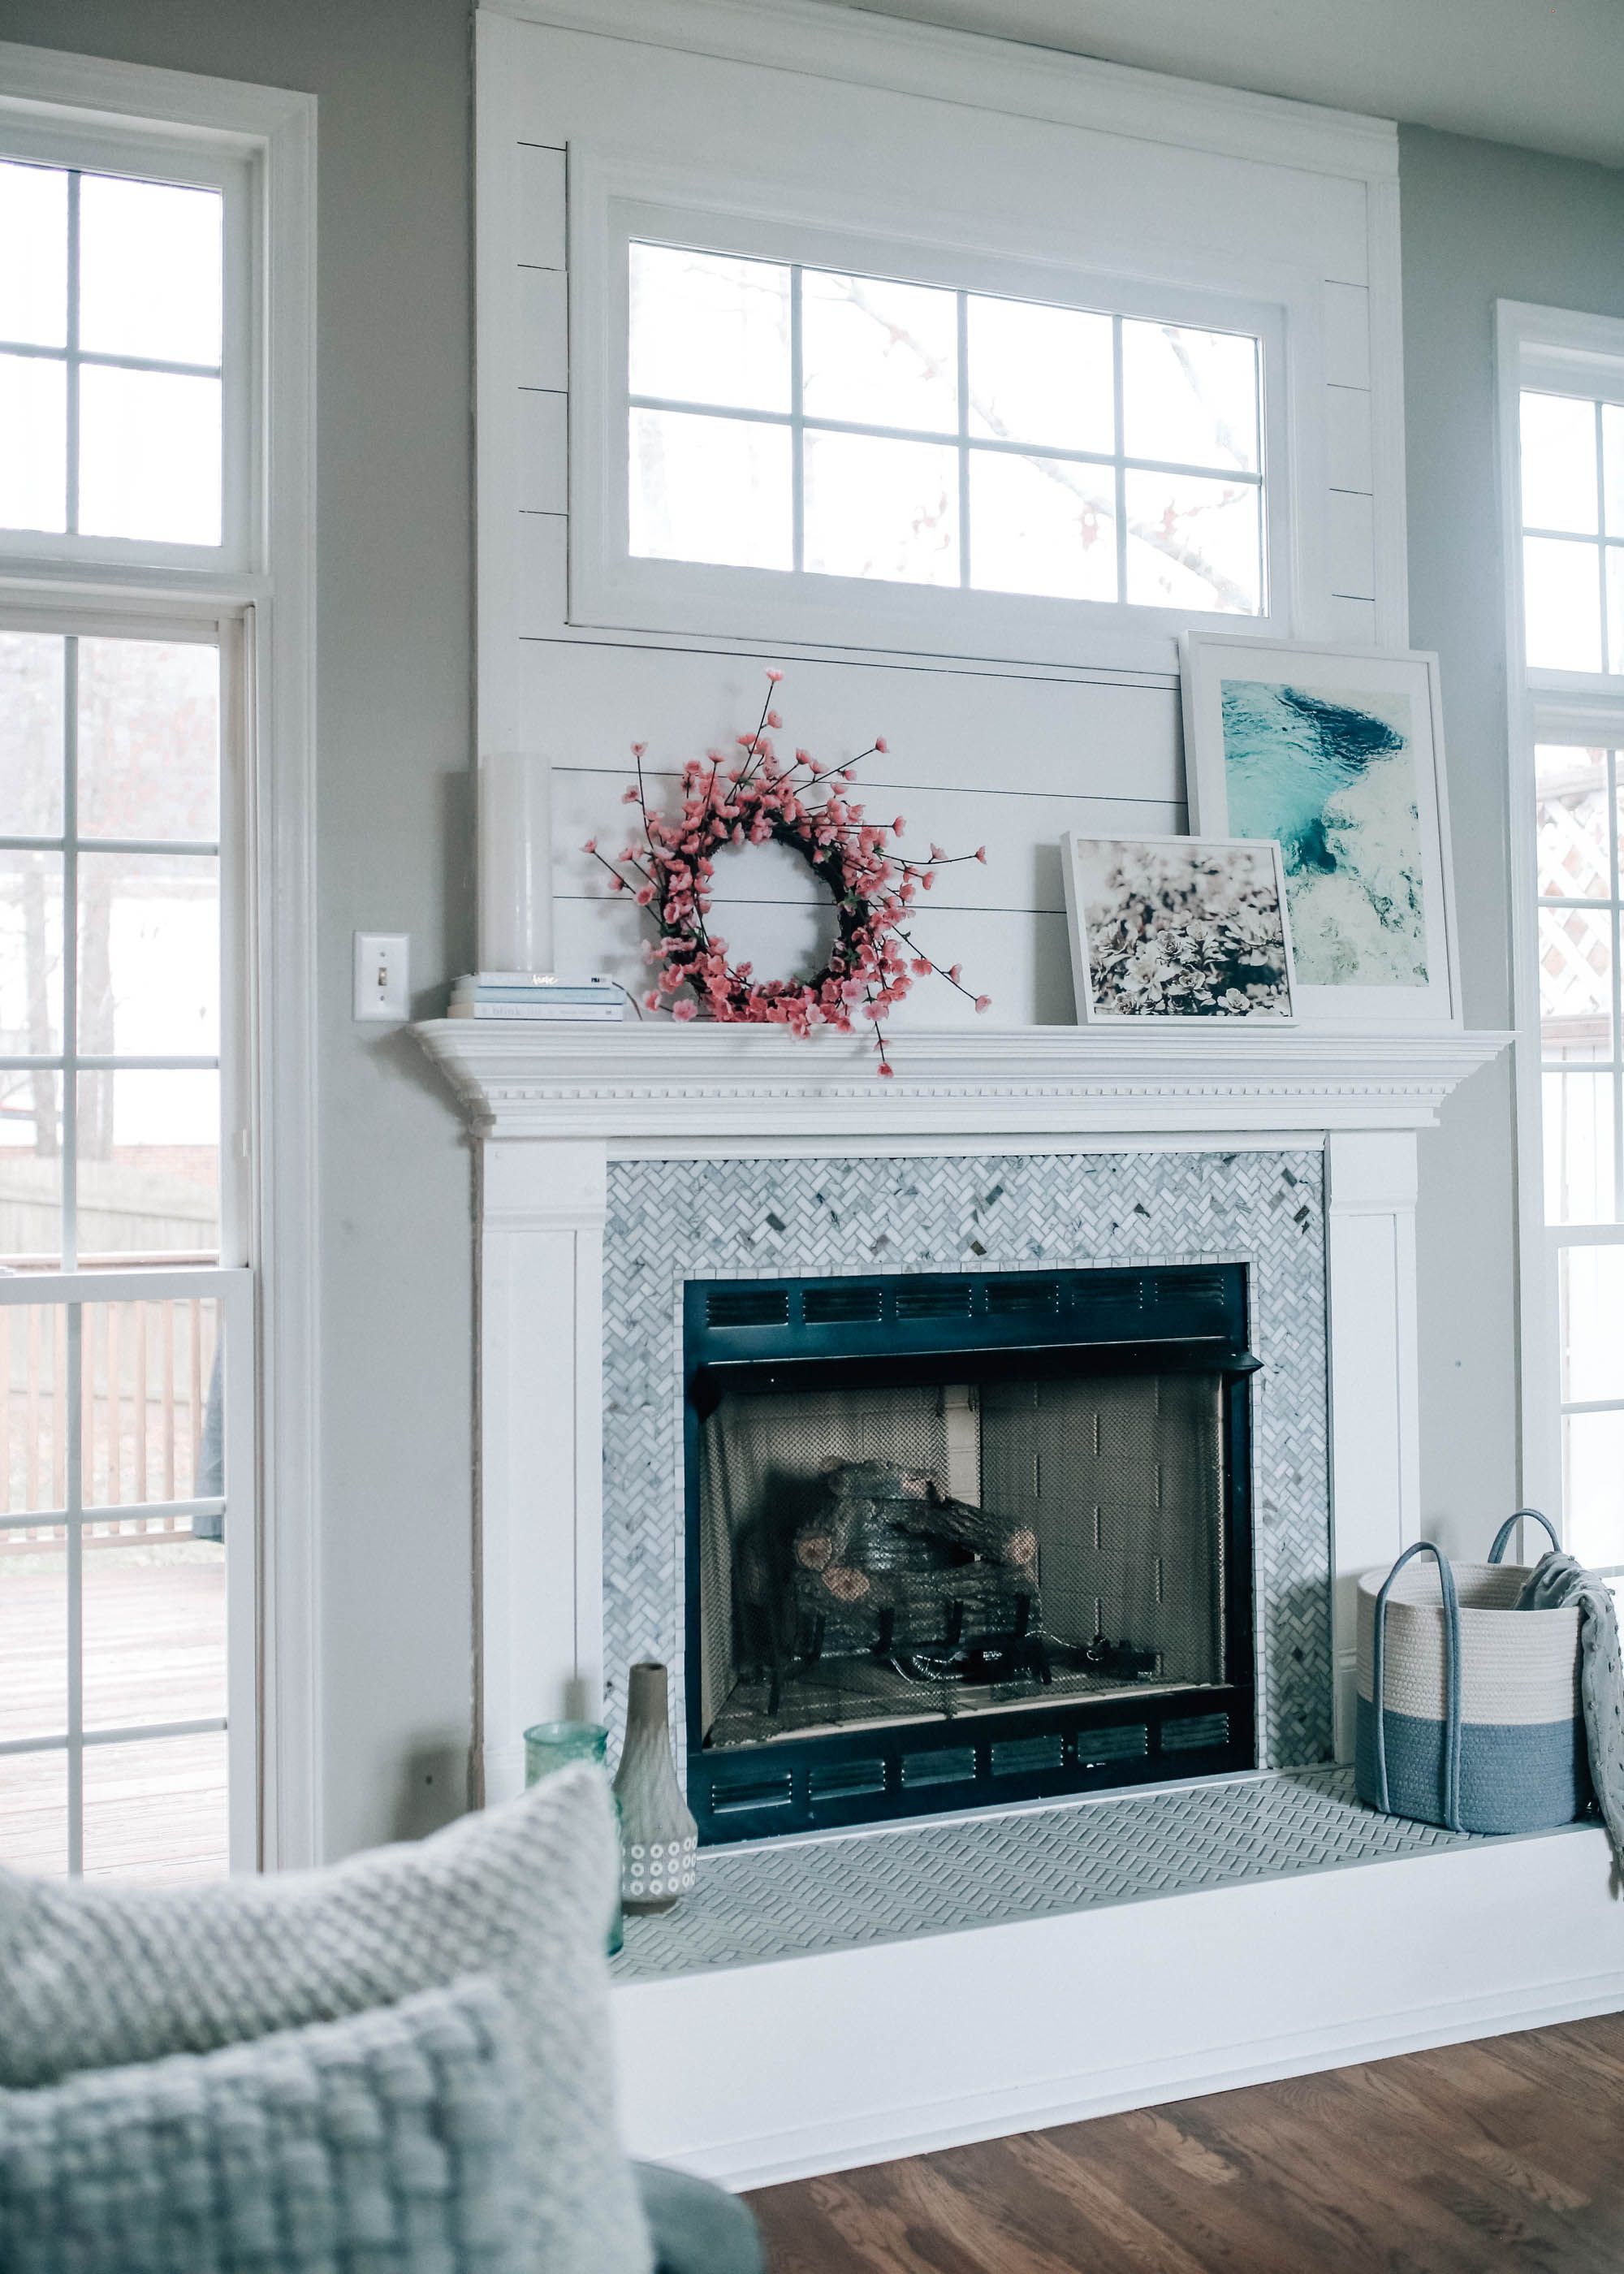 Diy Fireplace Ideas Elegant Fireplace Makeover Reveal with the Home Depot X Pretty In